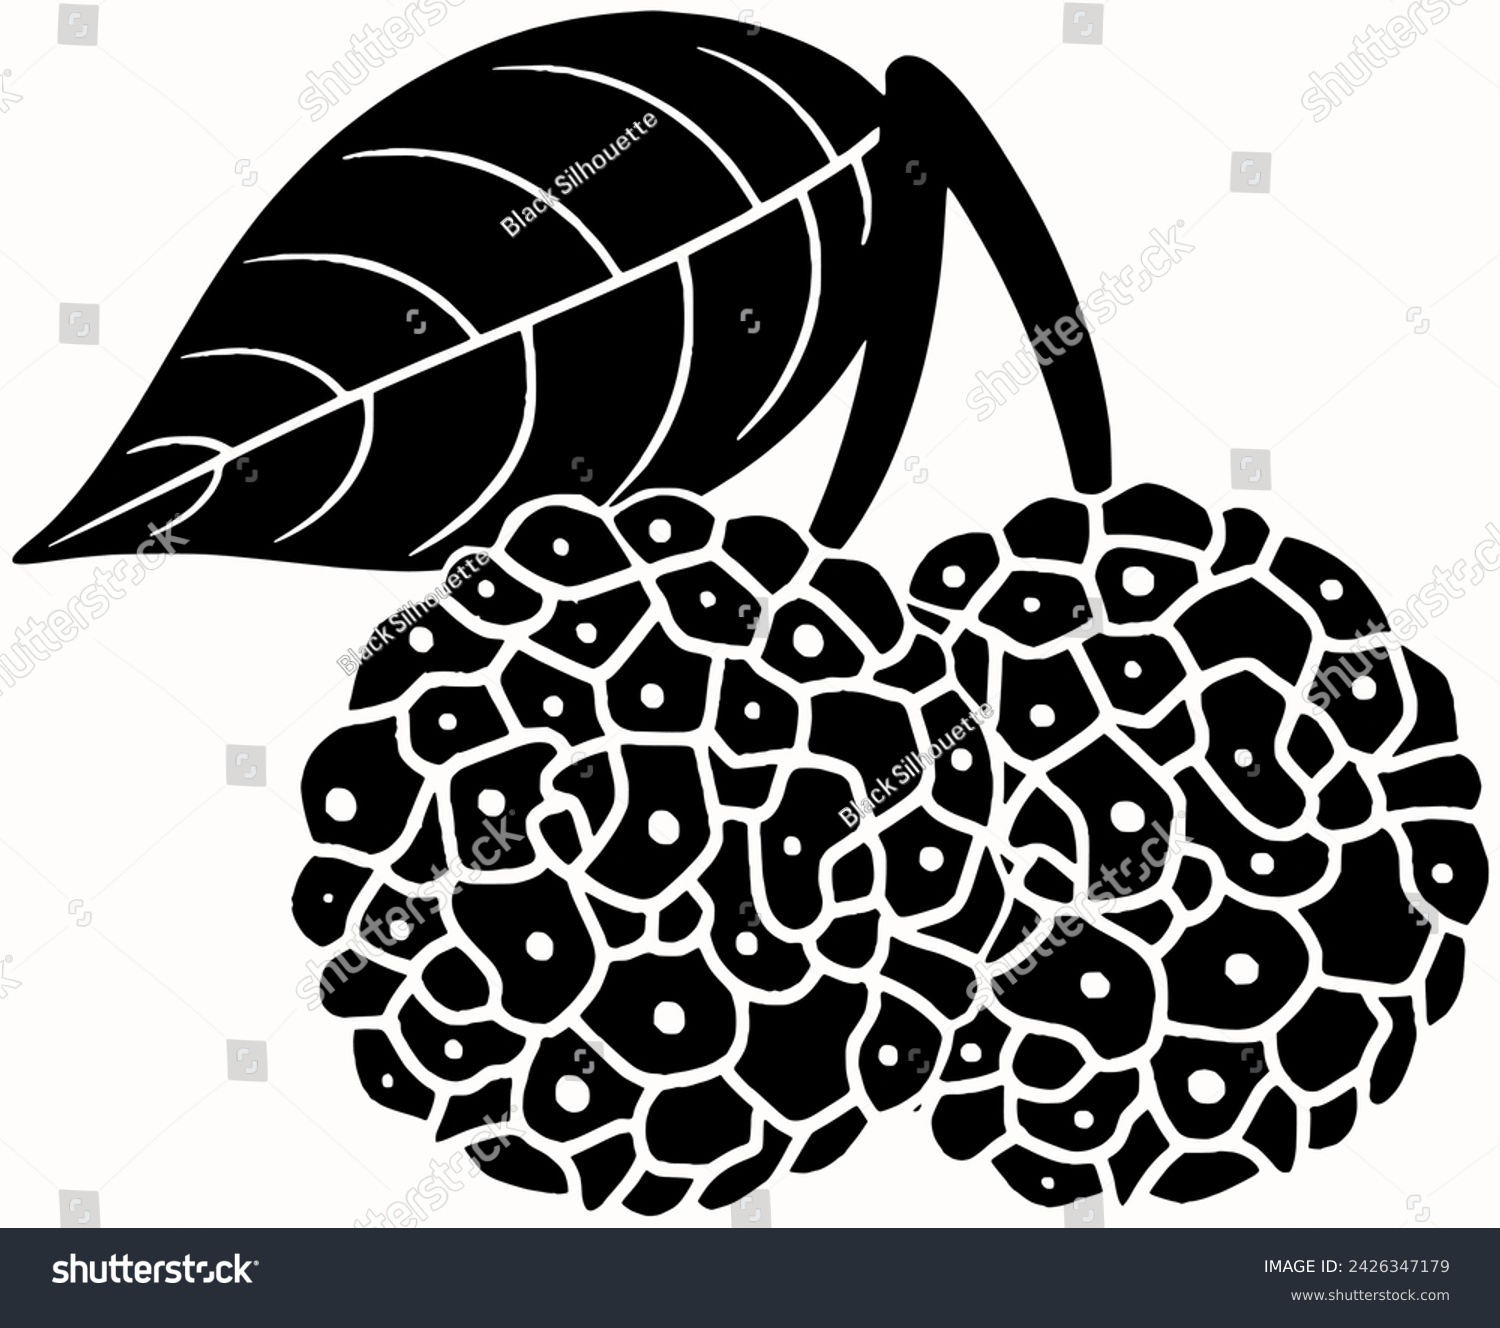 SVG of dogwood icon or leaf logo of flower illustration fruit for nature with natural silhouette and branch shape garden as cornus to fruit tree vector plant background berry art ripe of bush cornaceae svg